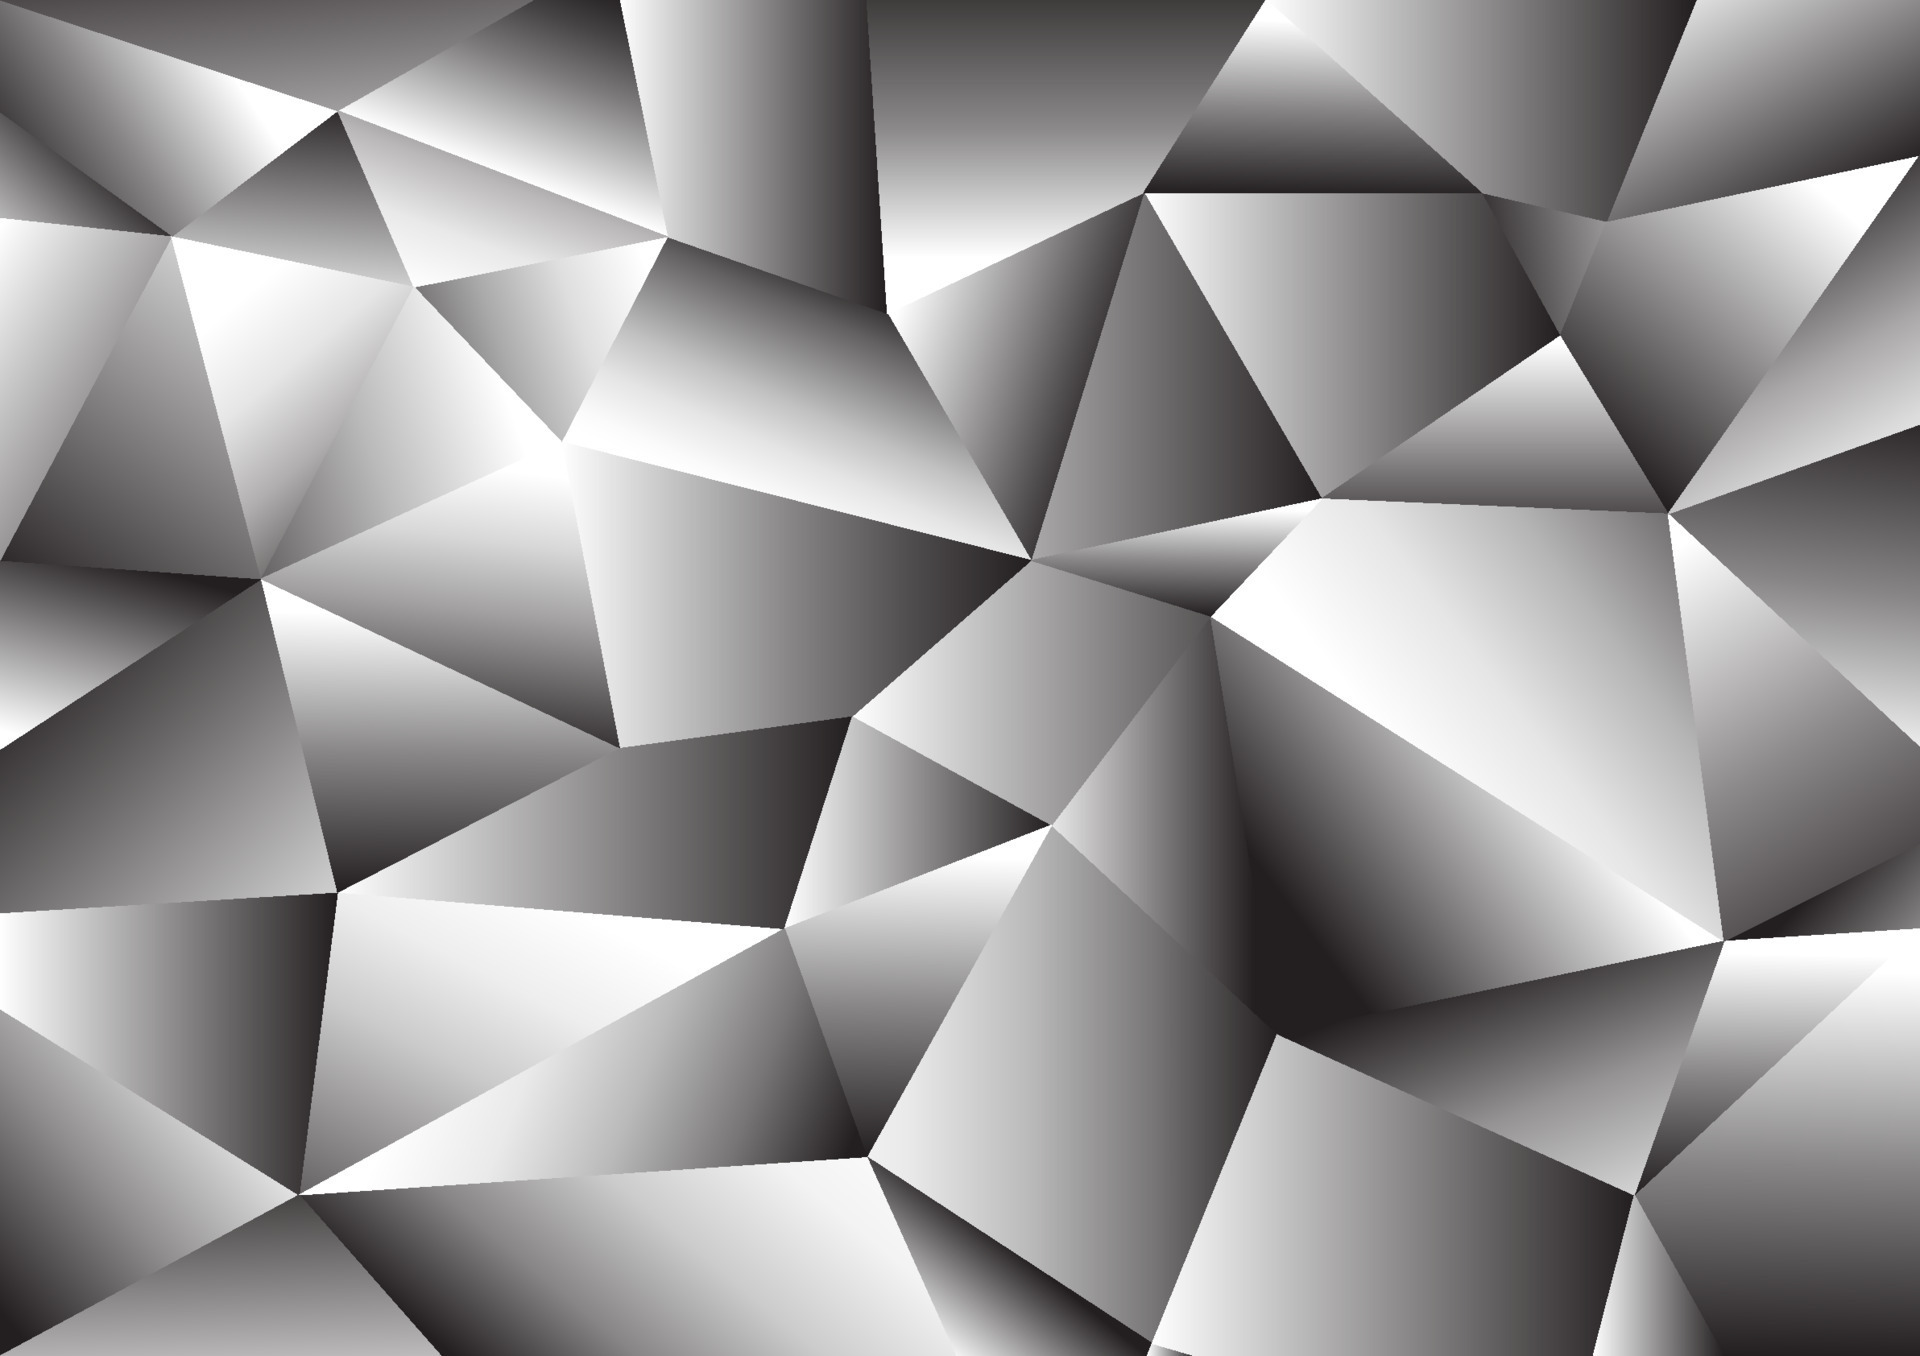 Abstract triangle background. White and grey geometric texture